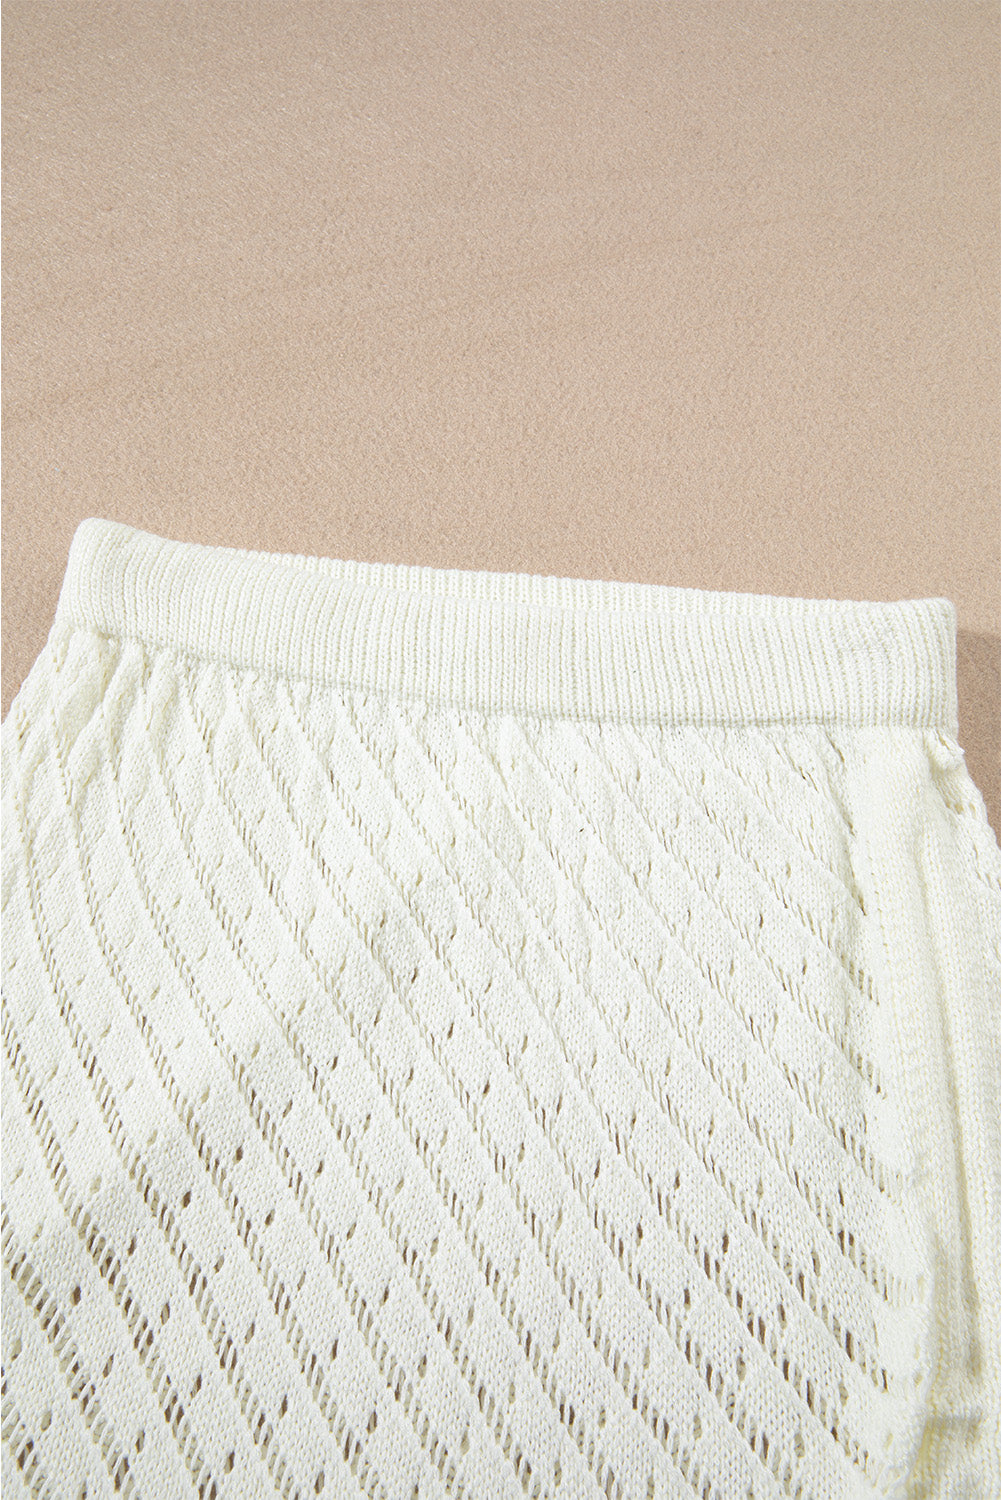 White Hollowed Crochet Cropped Two Piece Beach Cover Up